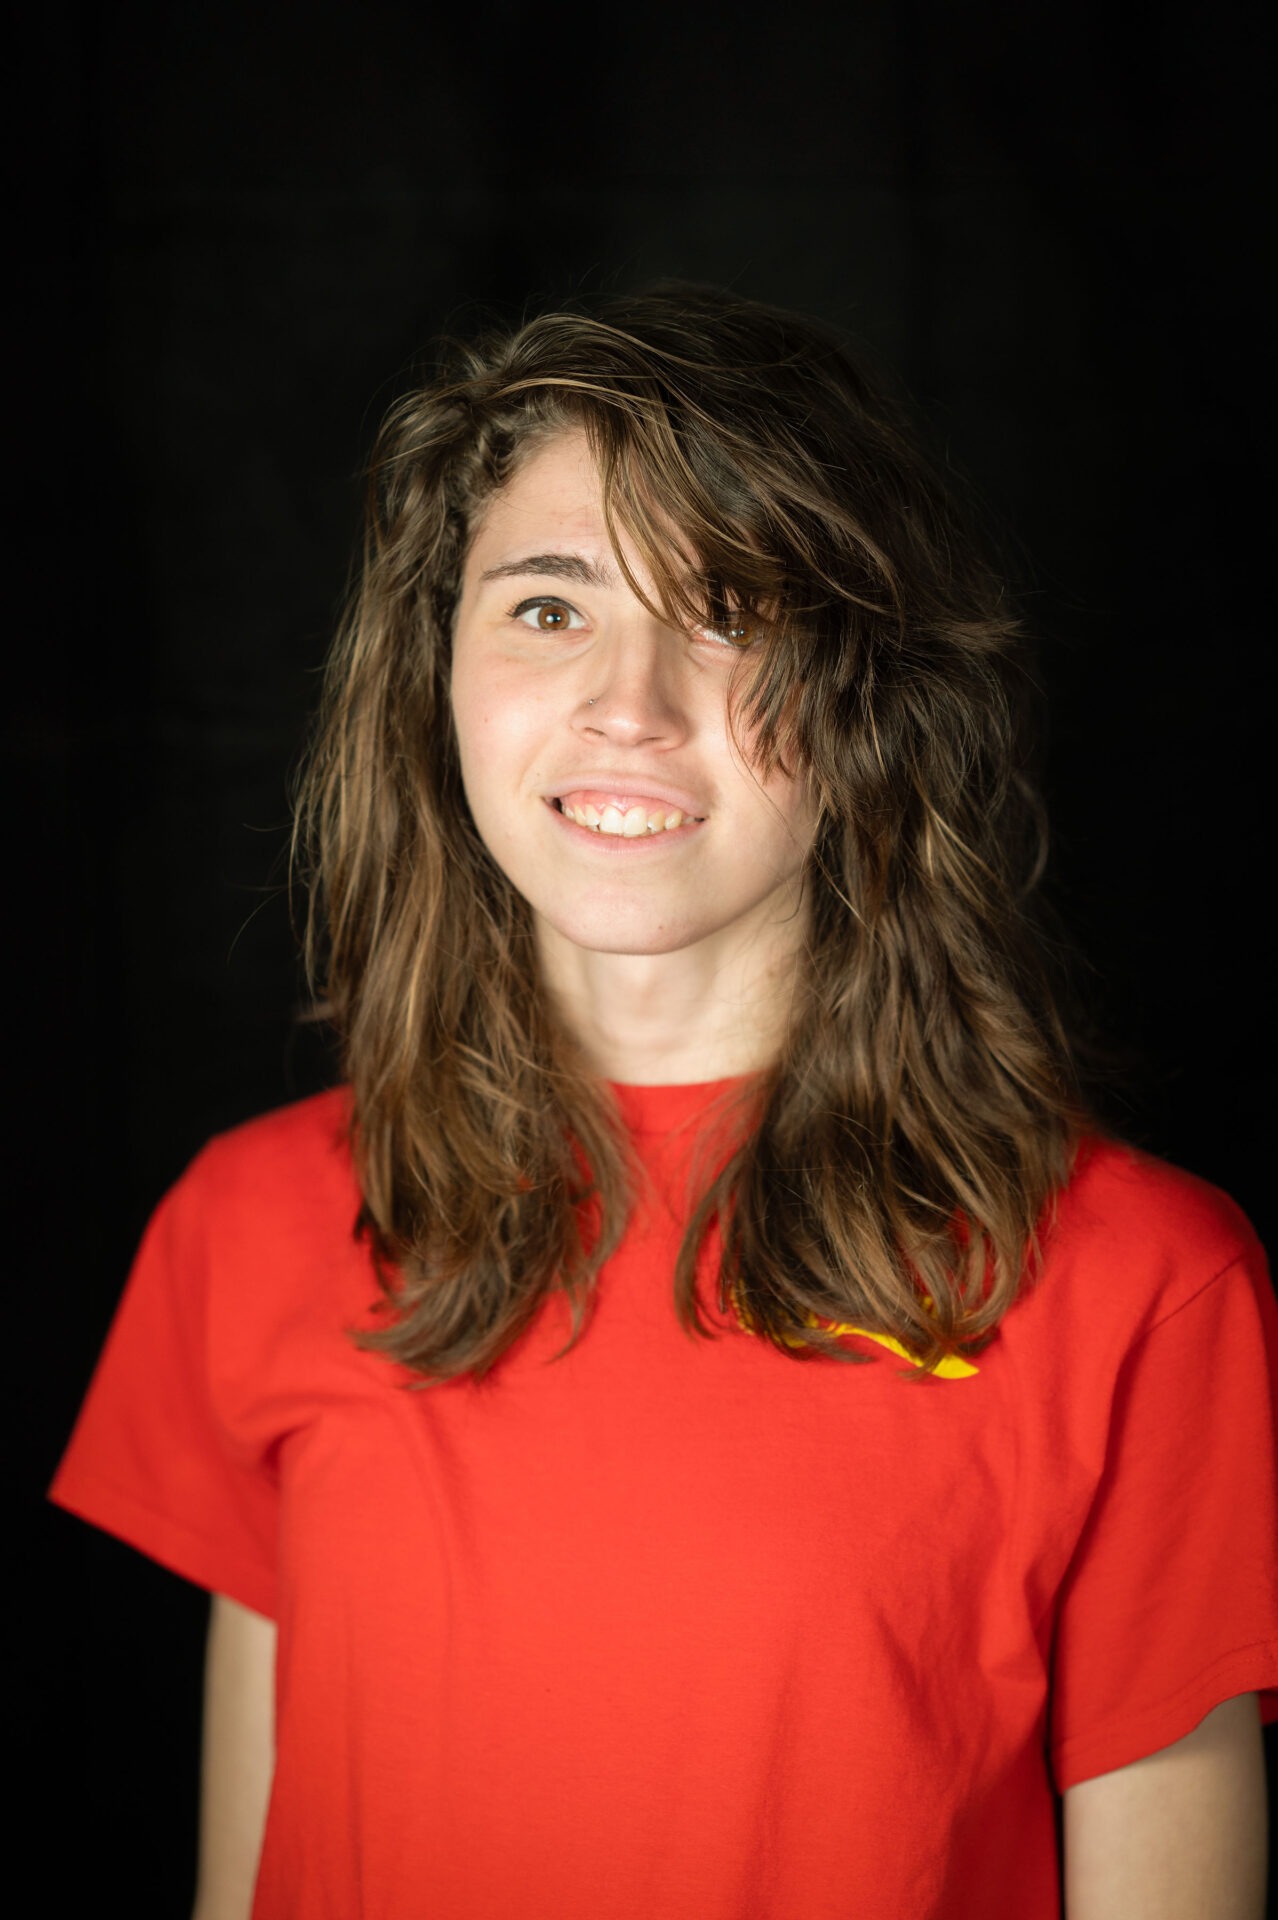 The image shows a smiling person with medium-length wavy hair, wearing a red shirt, in front of a dark background with soft lighting.